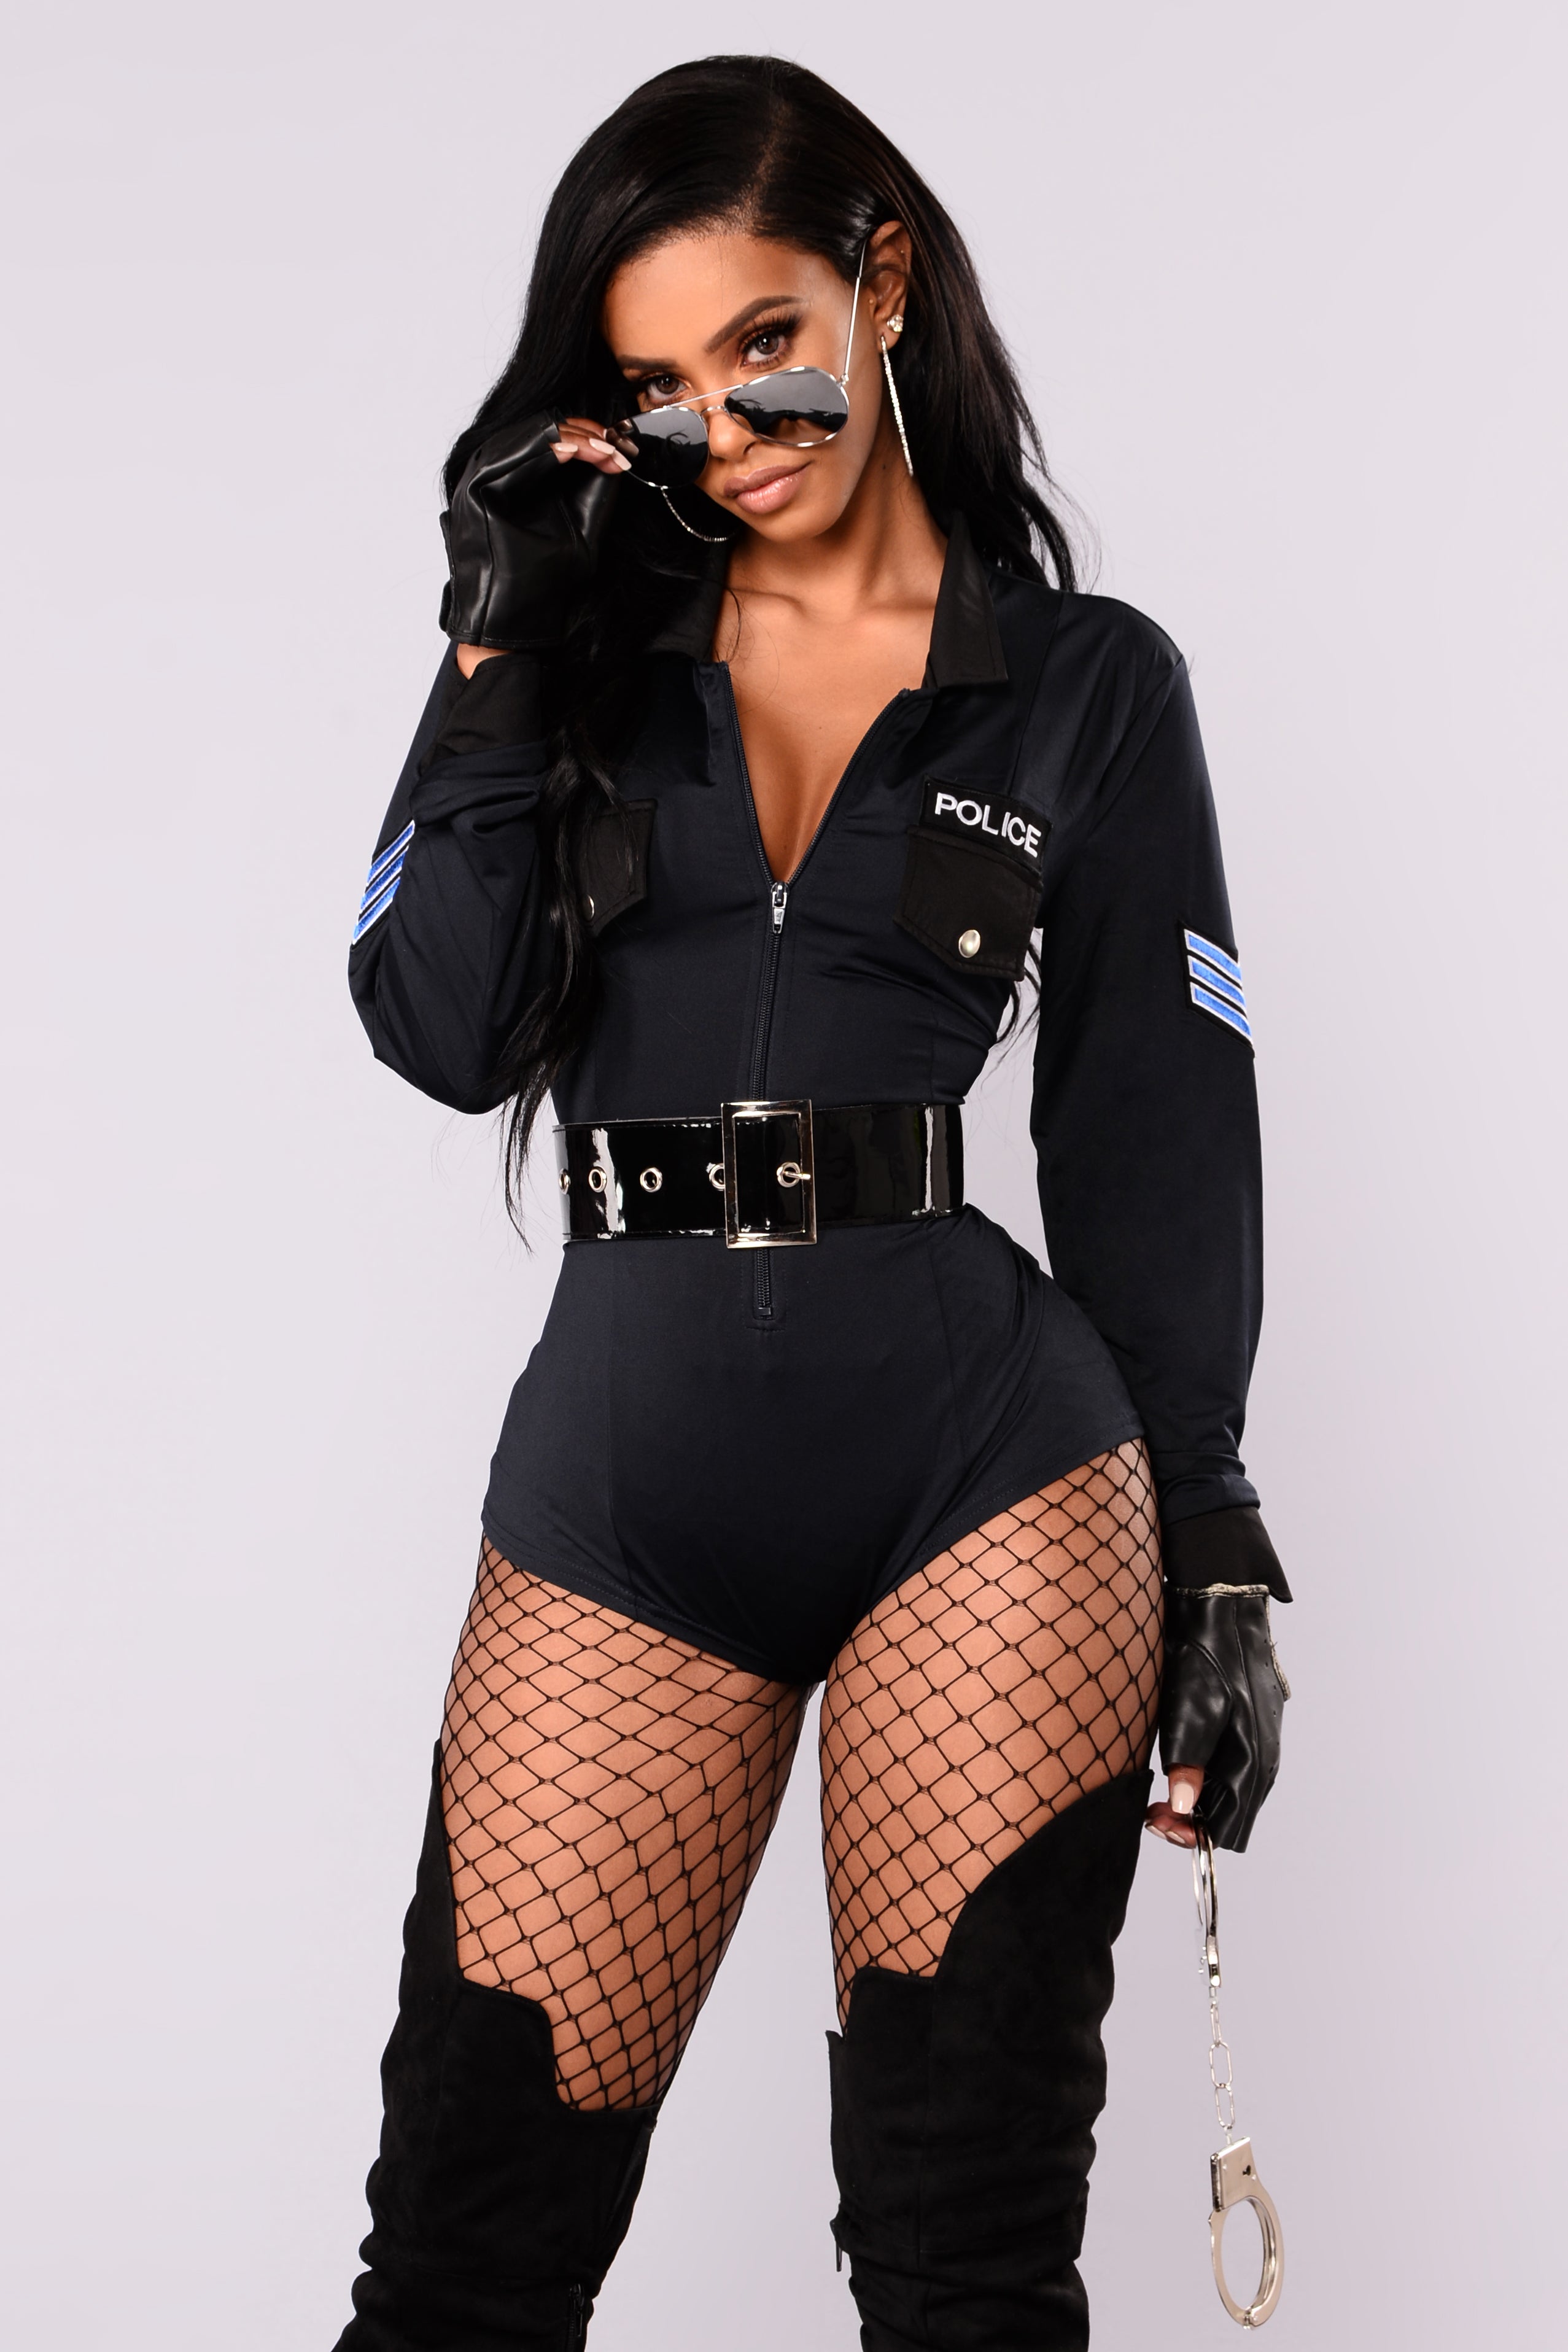 Déguisement police sexy femme